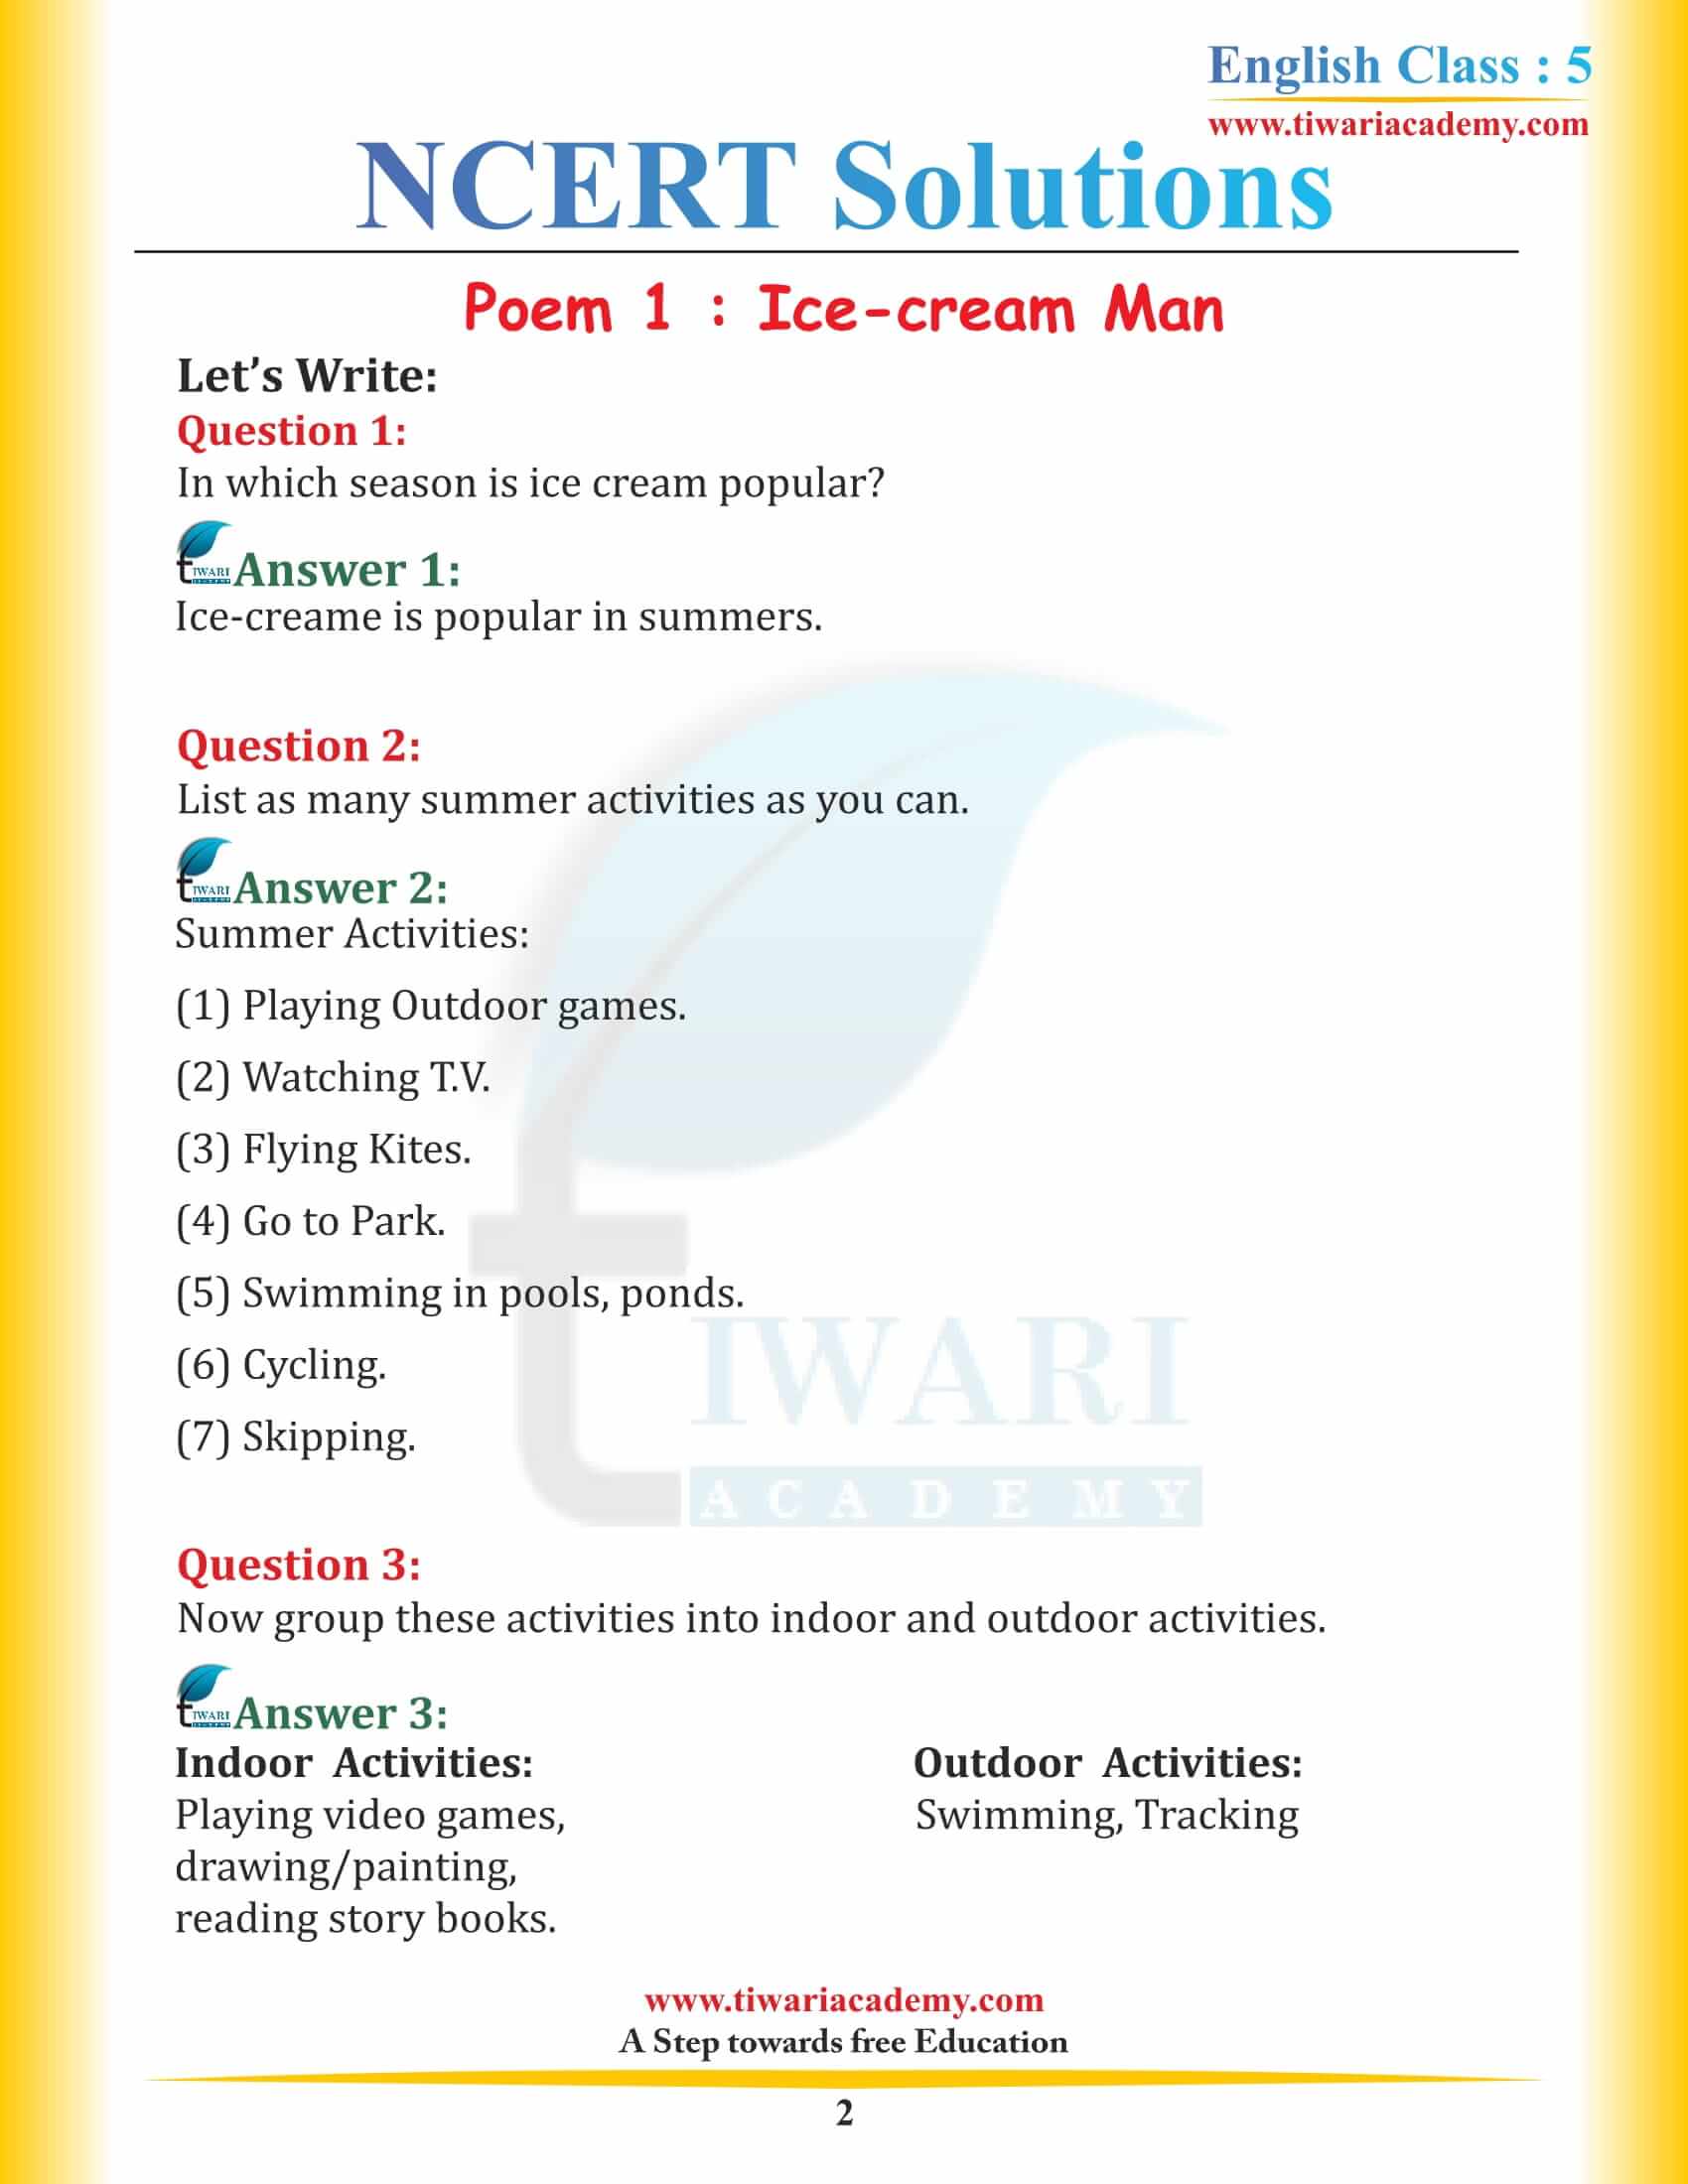 NCERT Solutions for Class 5 English Chapter 1 Ice-cream Man